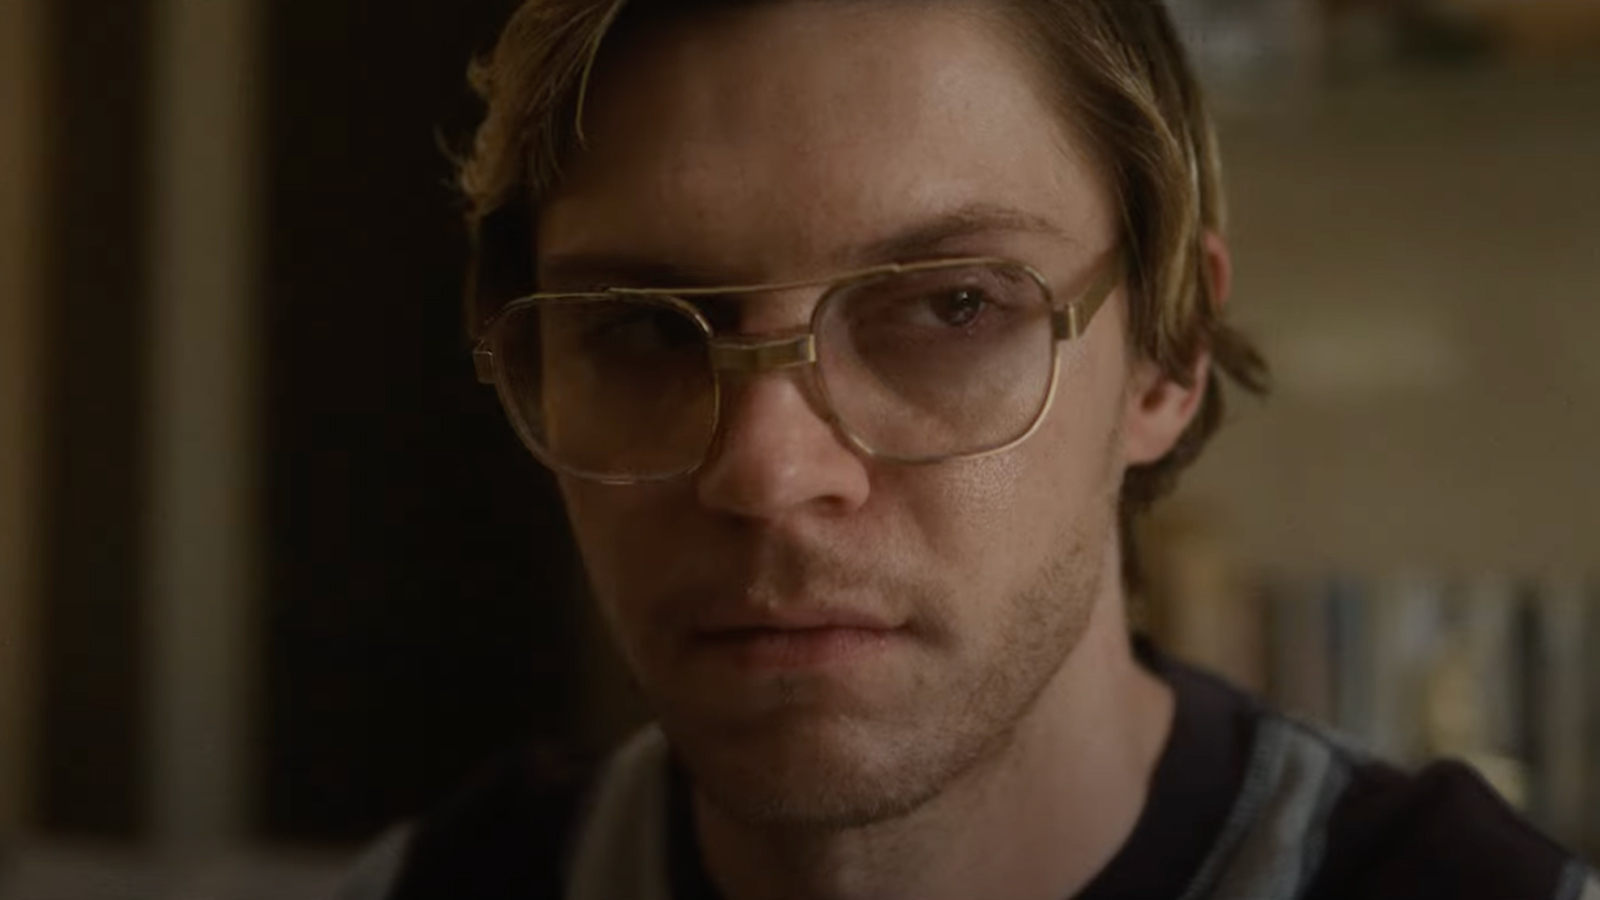 To play Jeffrey Dahmer Ryan Murphy says Evan Peters stayed in character  for months  British GQ